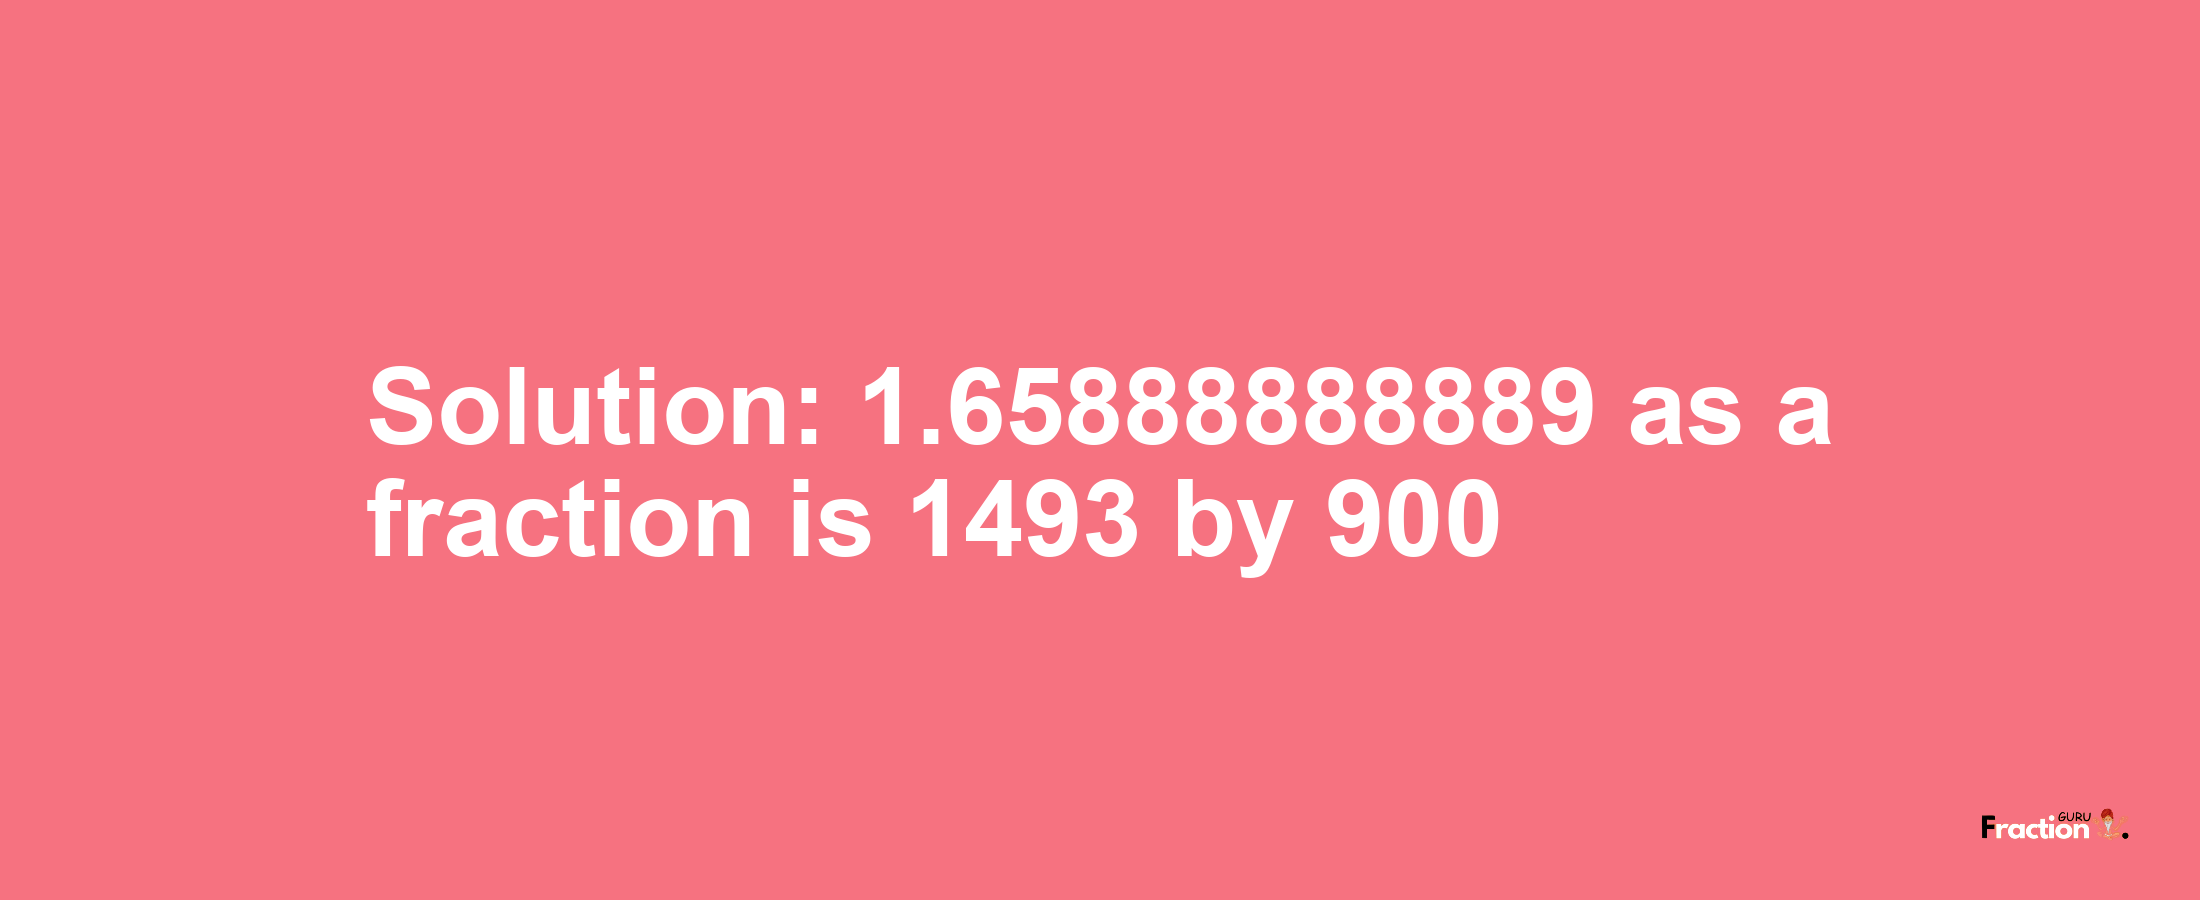 Solution:1.65888888889 as a fraction is 1493/900